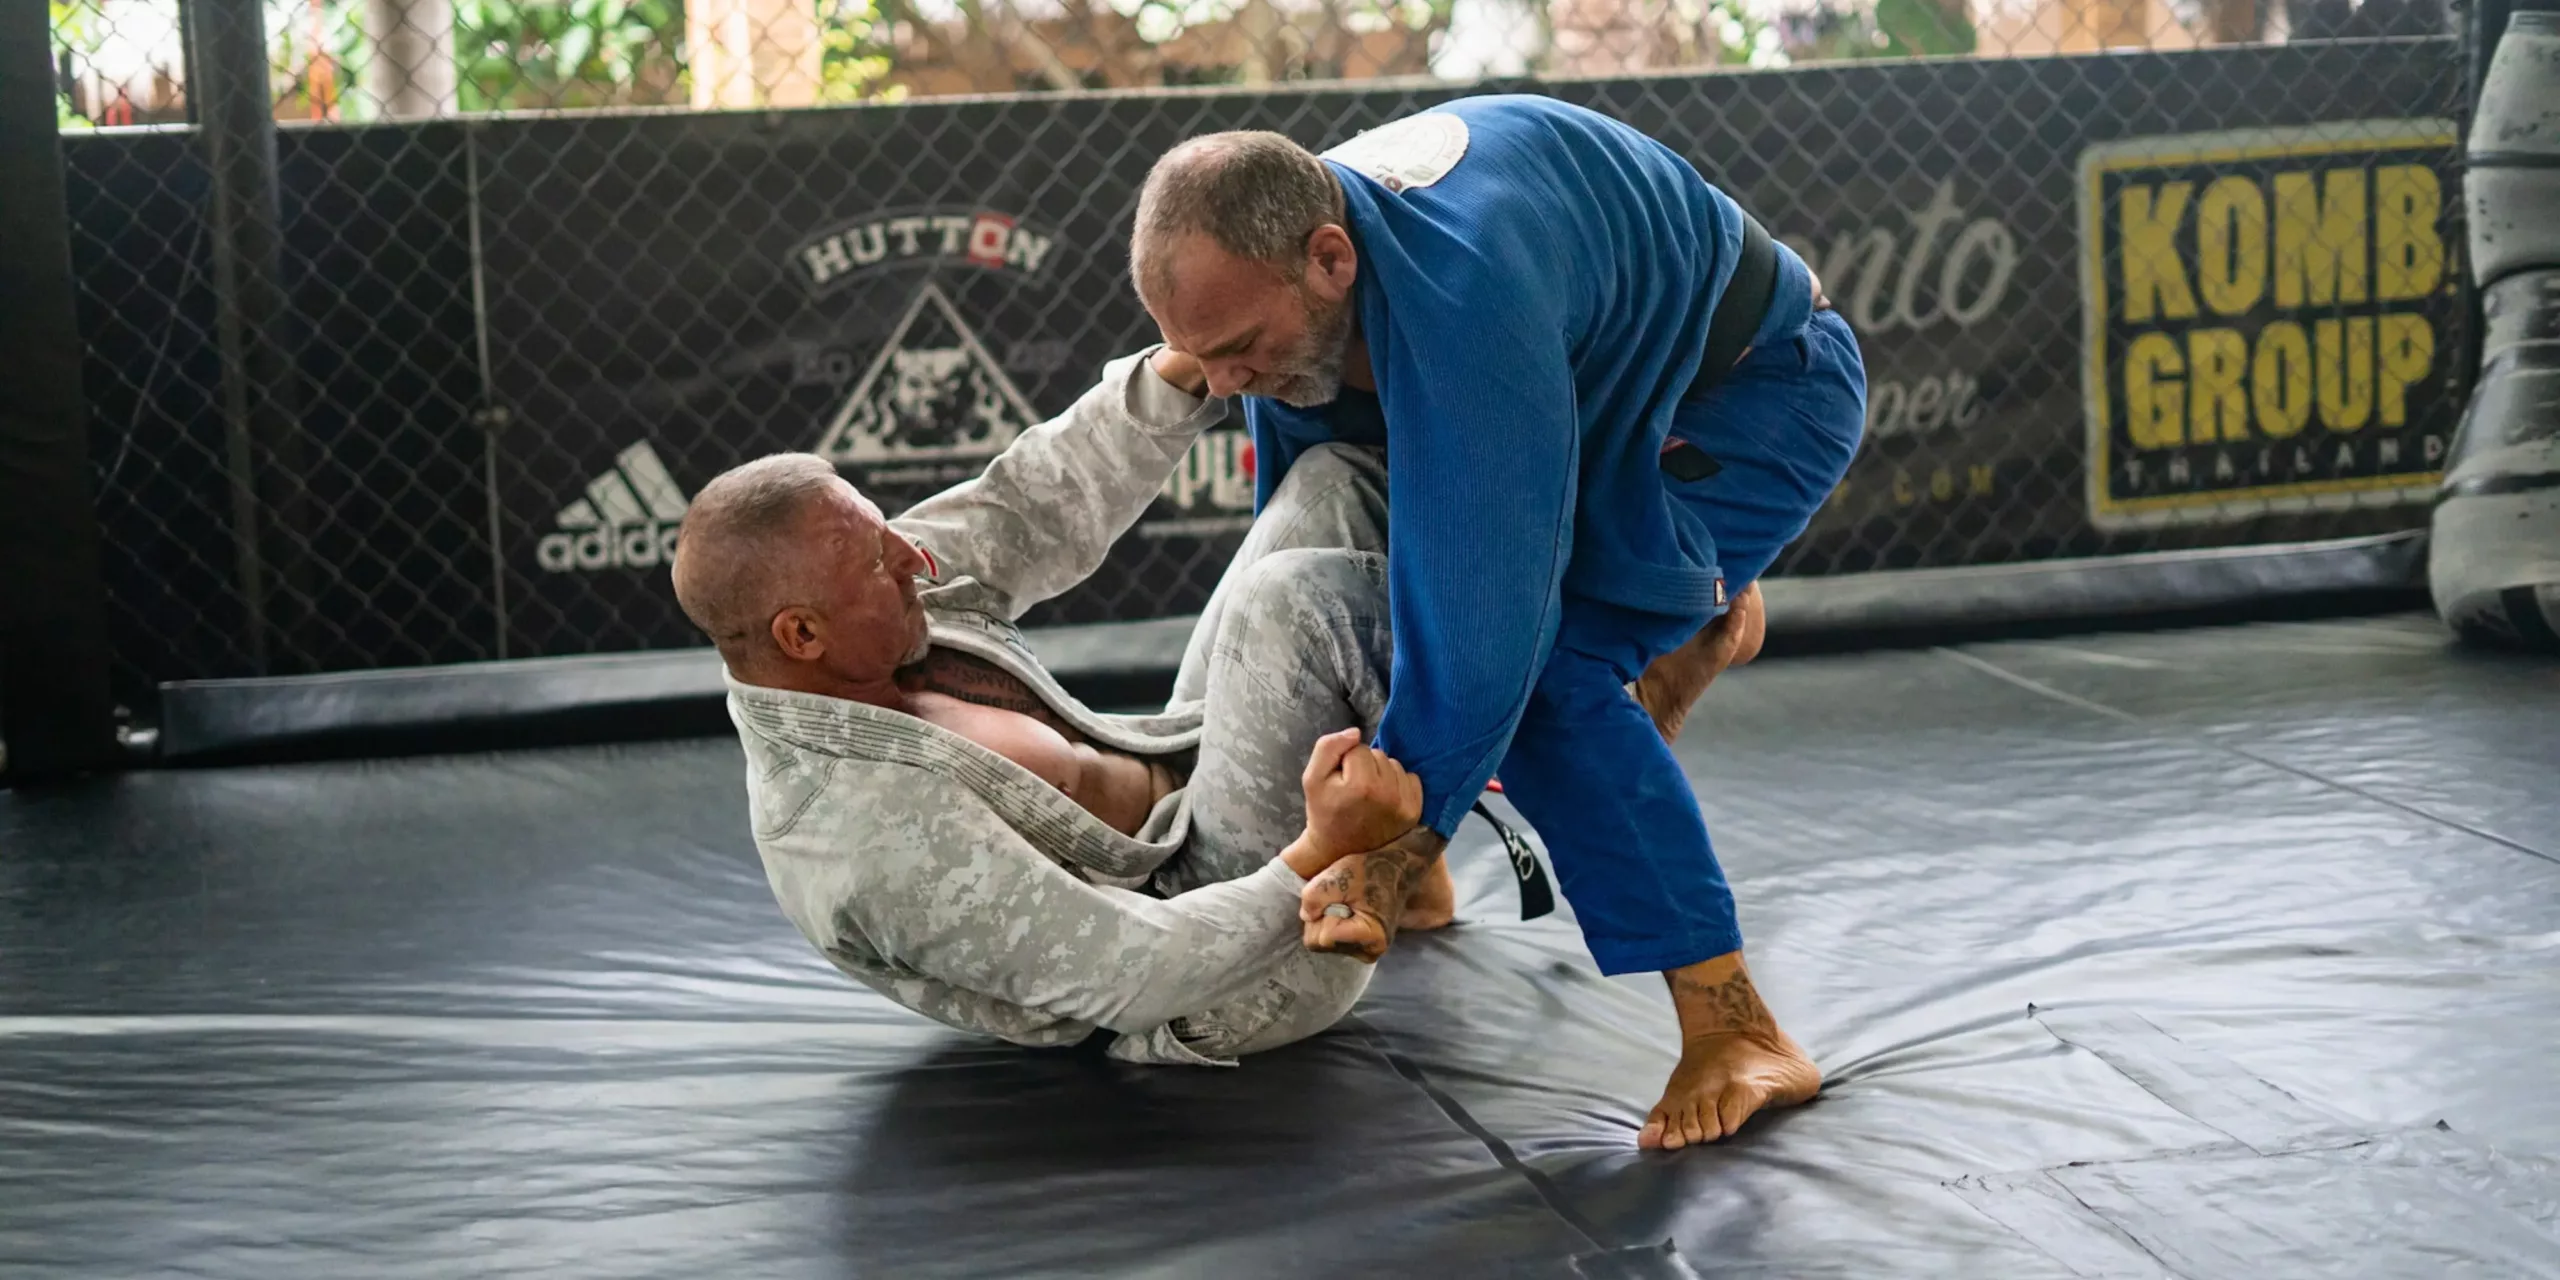 A Brazilian Jiu-Jitsu athlete on the ground works a complex guard against a standing opponent, showcasing the technical and strategic depth of ground combat in BJJ.